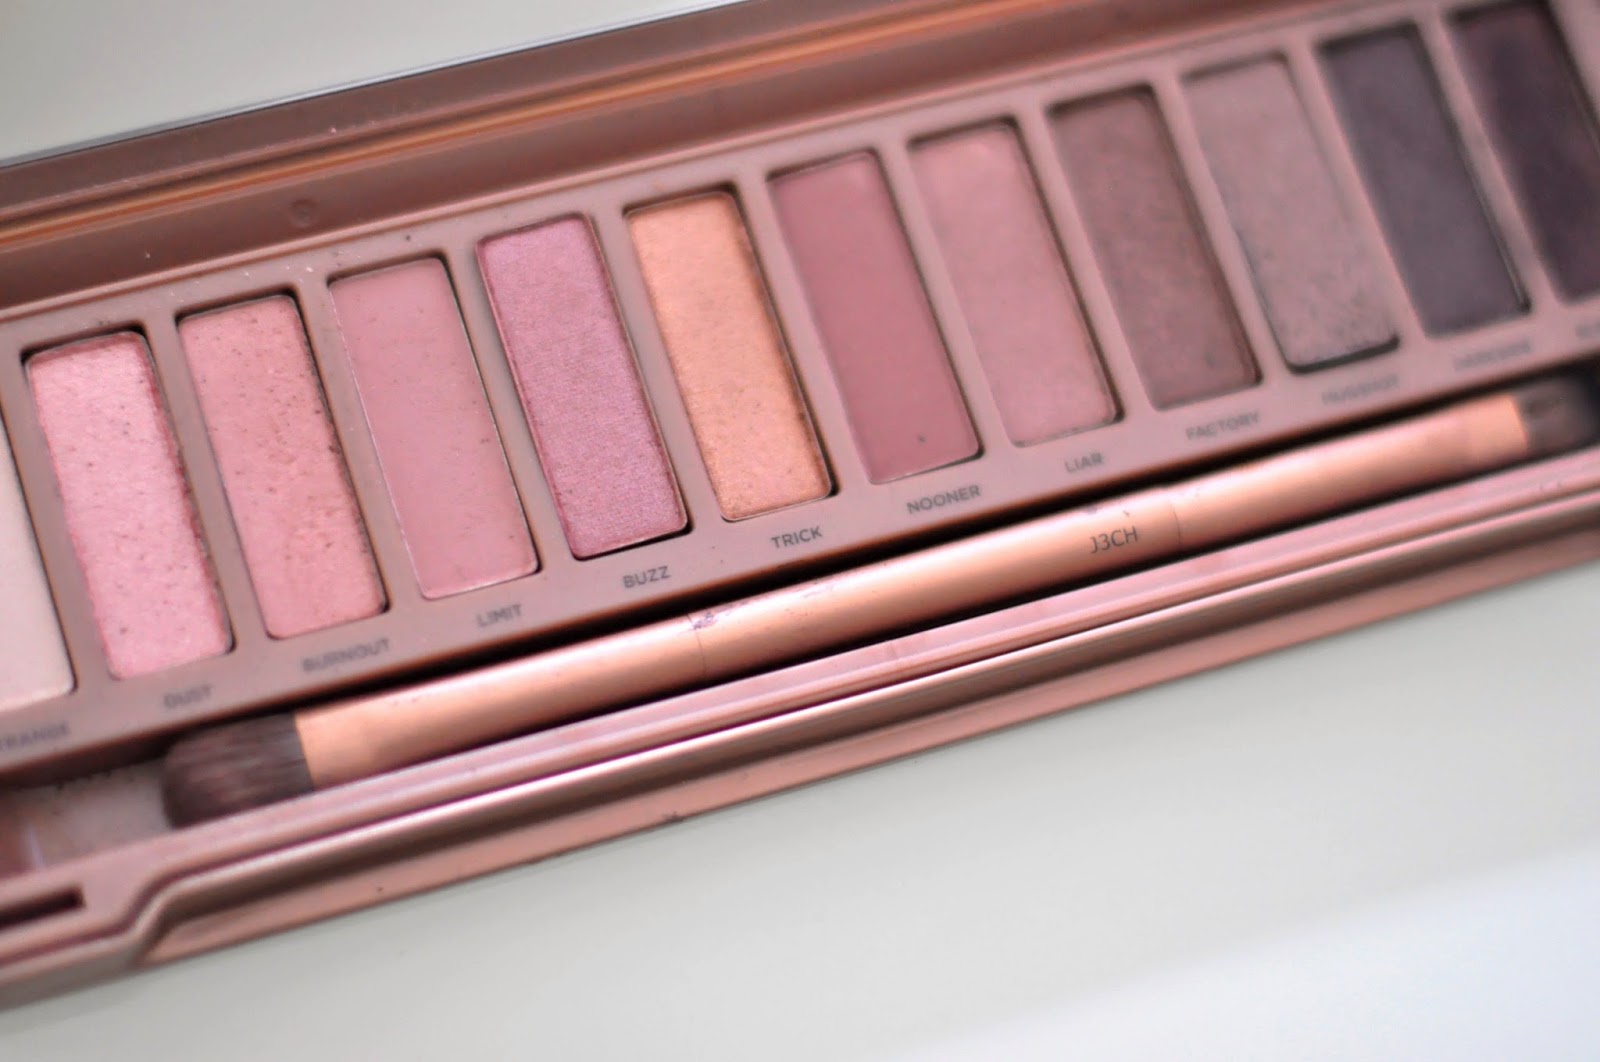 Palette Naked 3 Urban Decay